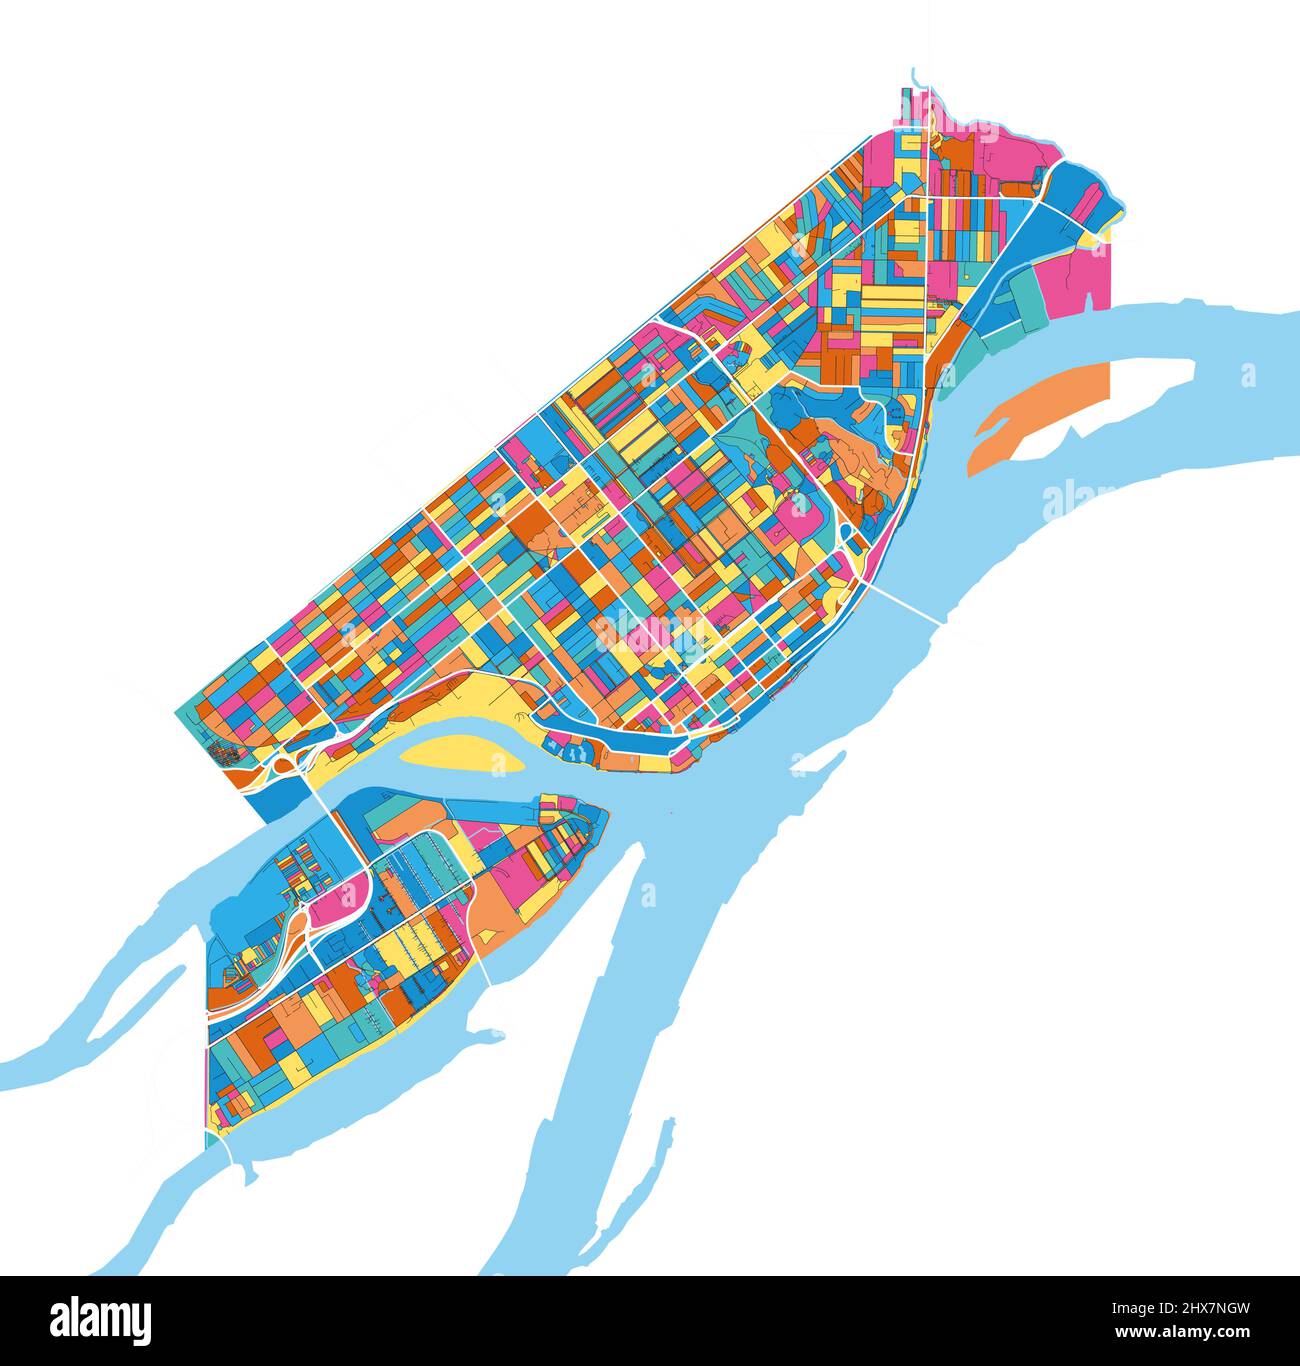 NewWestminster, British Columbia, Canada colorful high resolution vector art map with city boundaries. White outlines for main roads. Many details. Bl Stock Vector